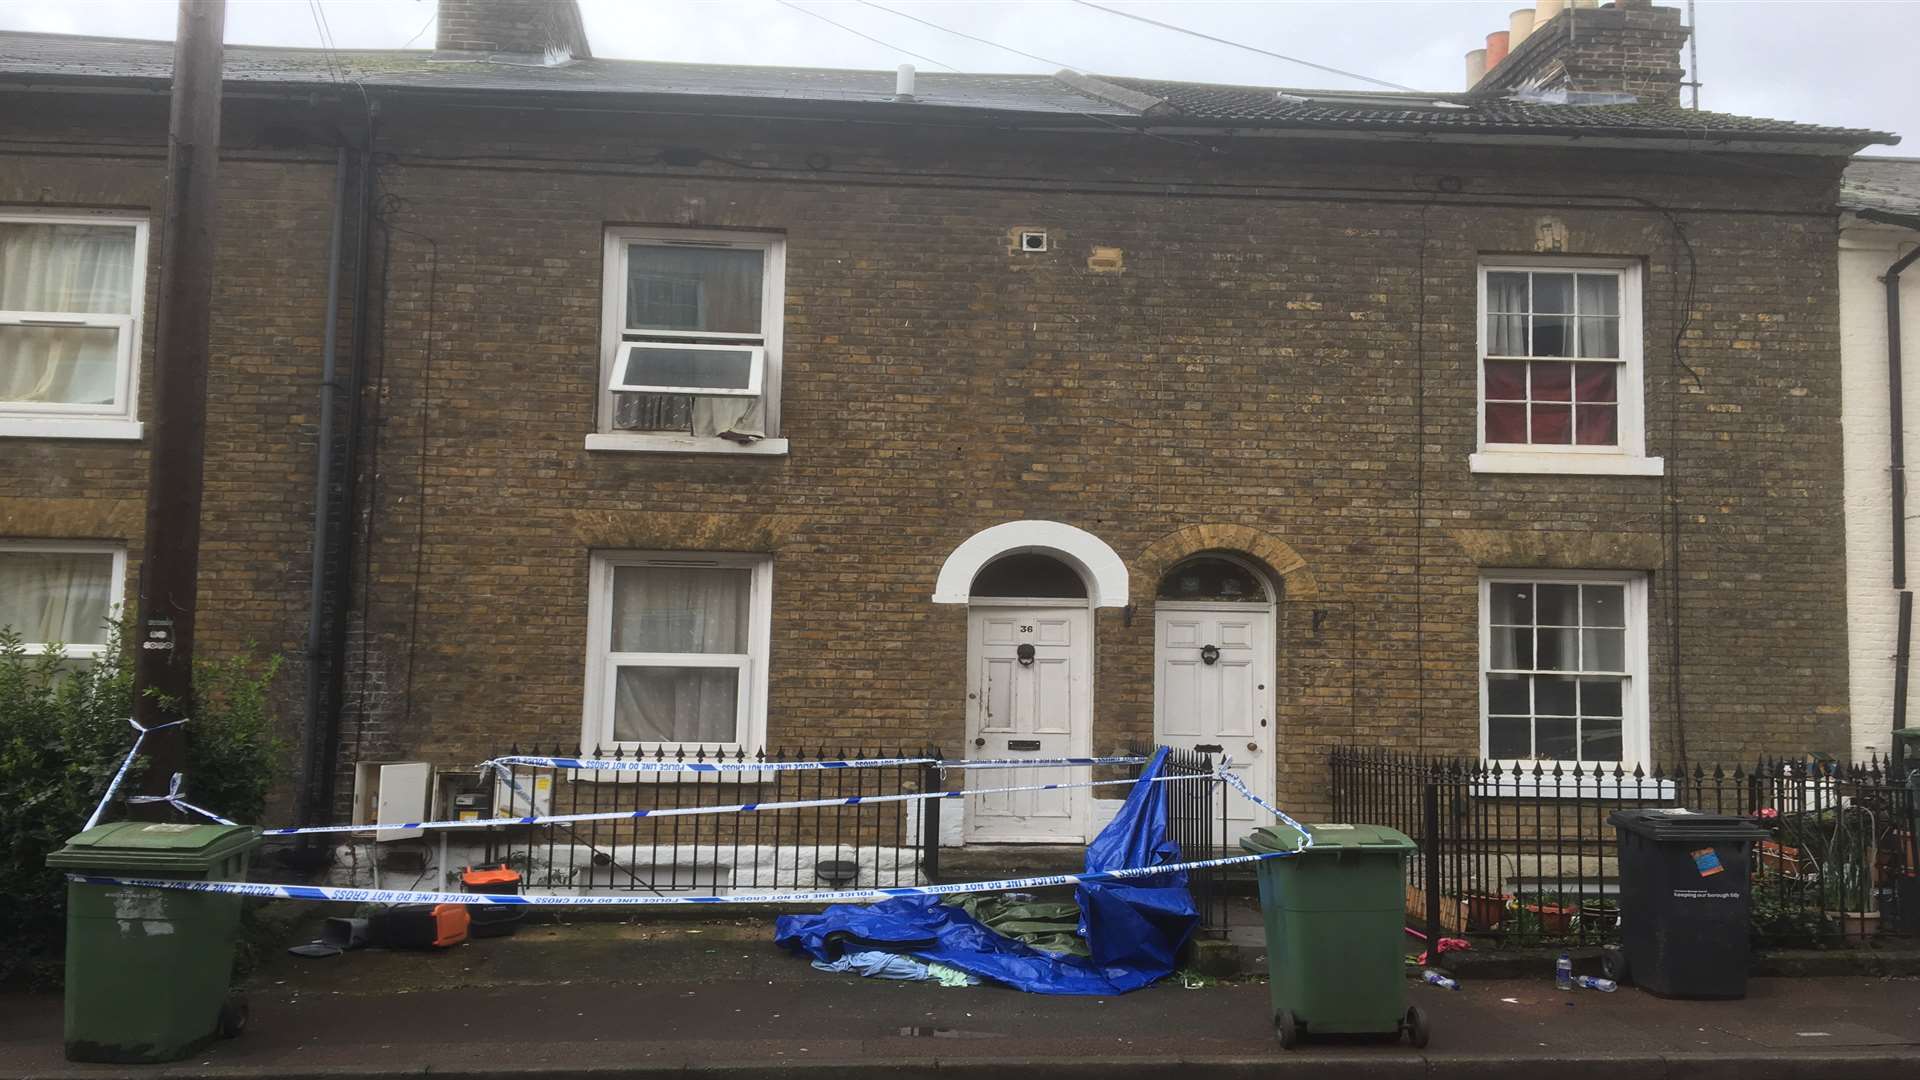 Police have taped off the house after last night's blaze in Marsham Street